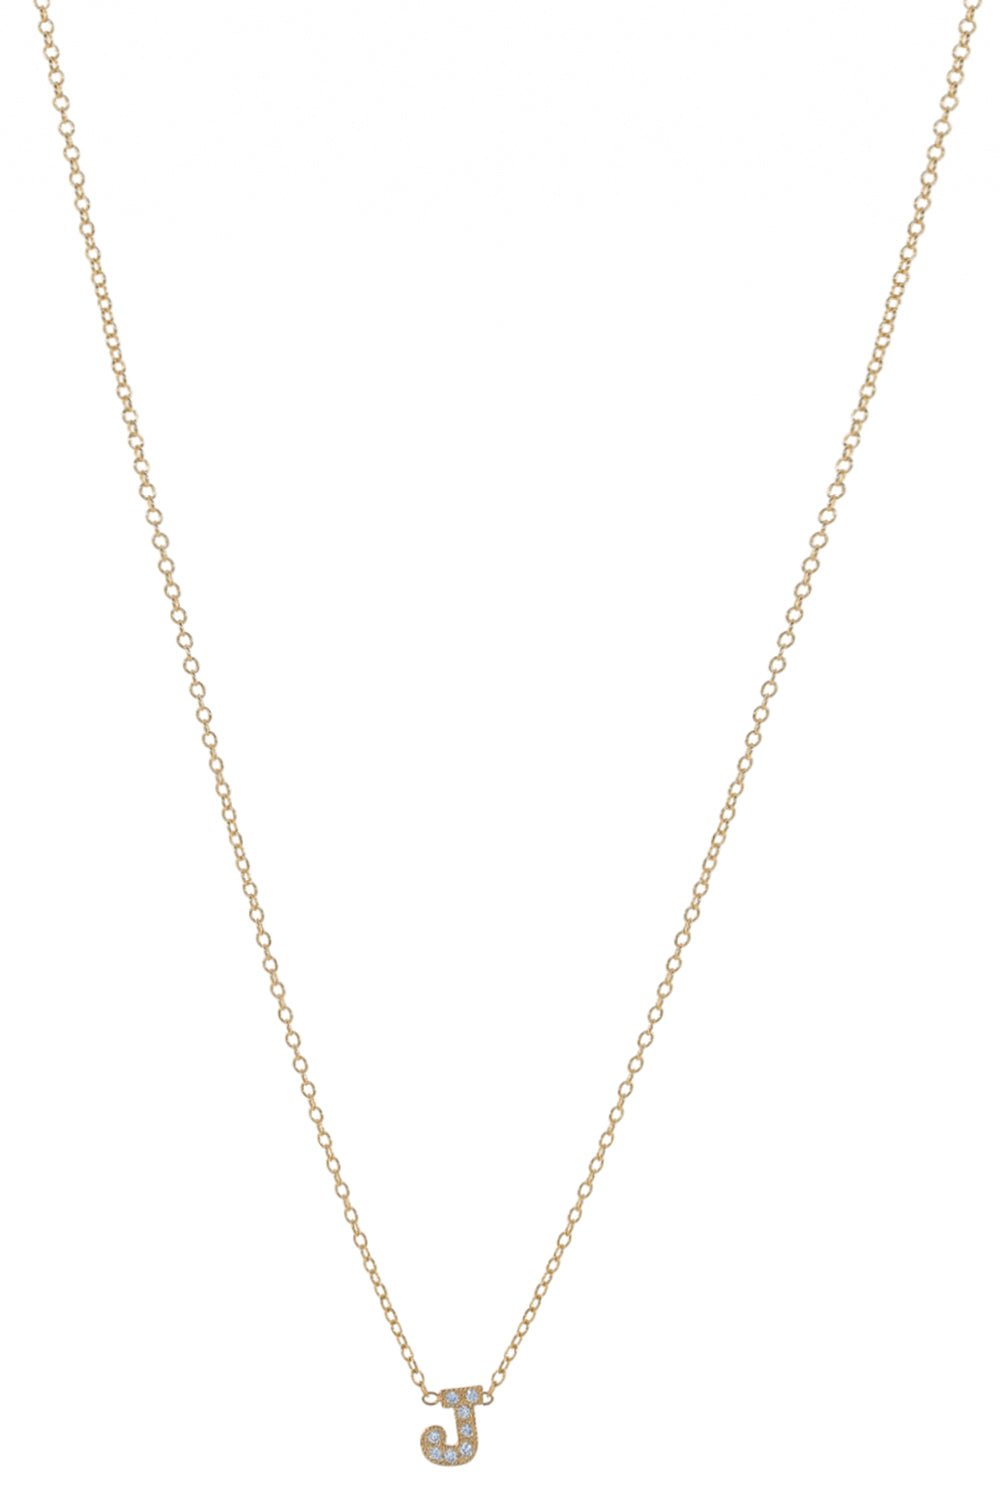 ZOE CHICCO-Single Initial Necklace-YELLOW GOLD